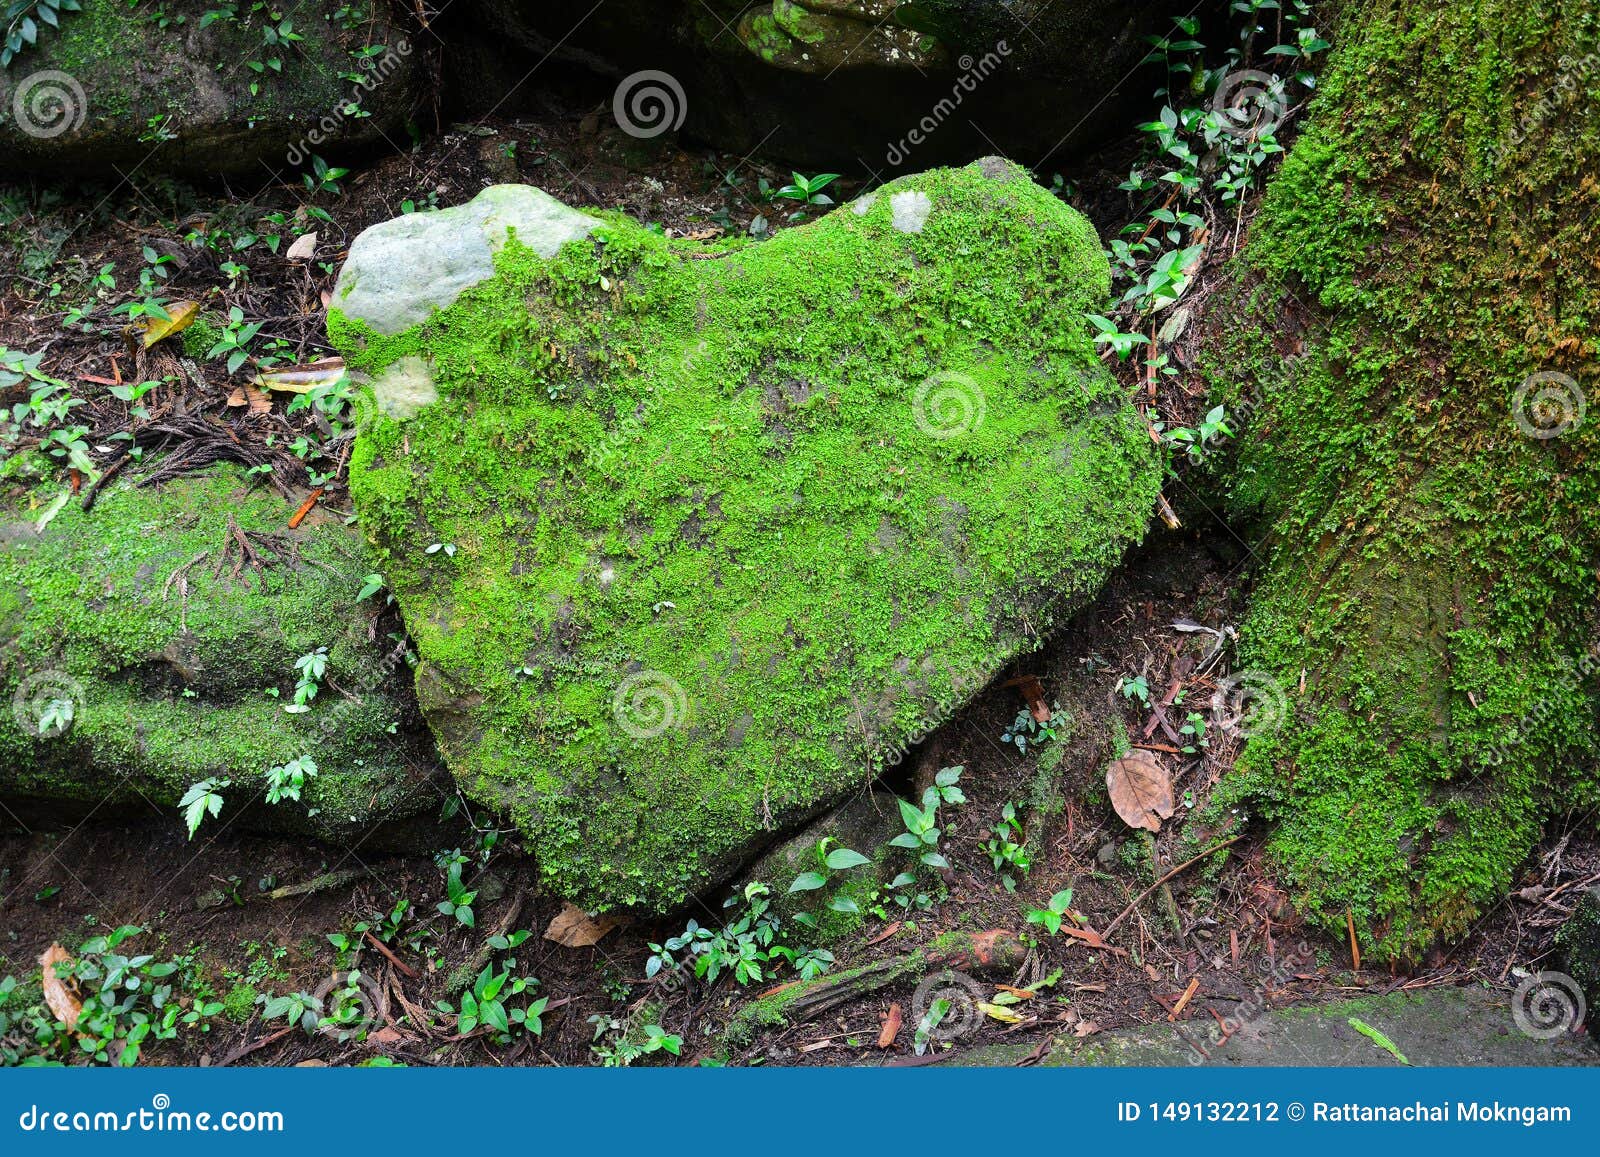 stone in the  of the heart covered with green moss and lichen in tropical forest, environment conservation concept